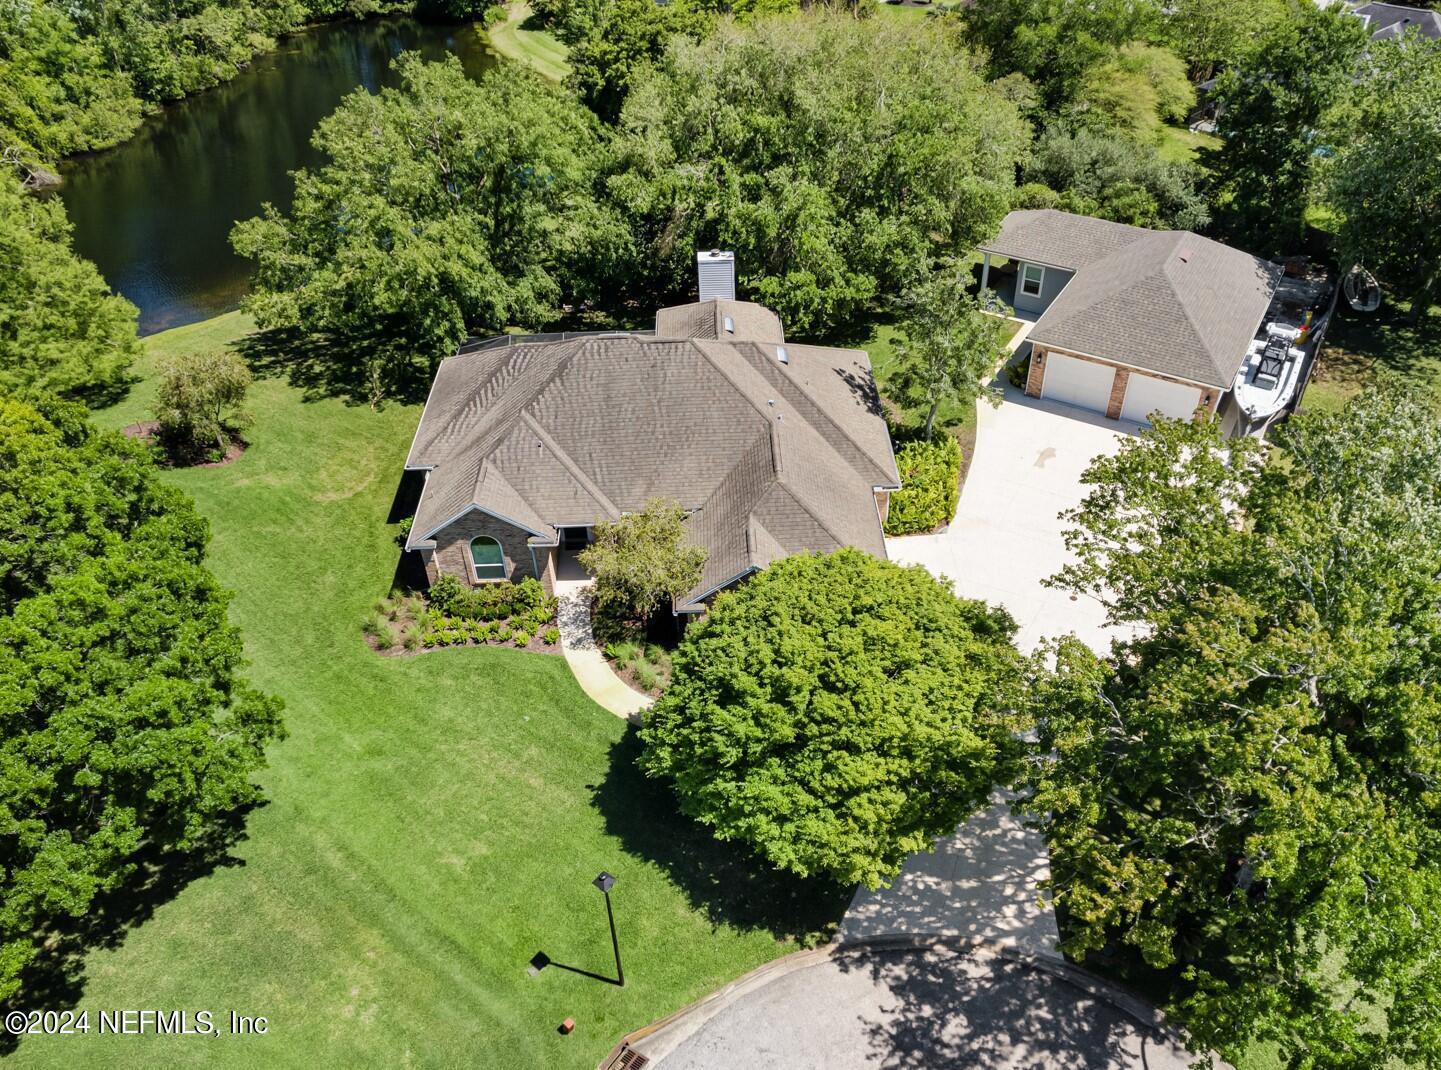 an aerial view of a house with yard and green space